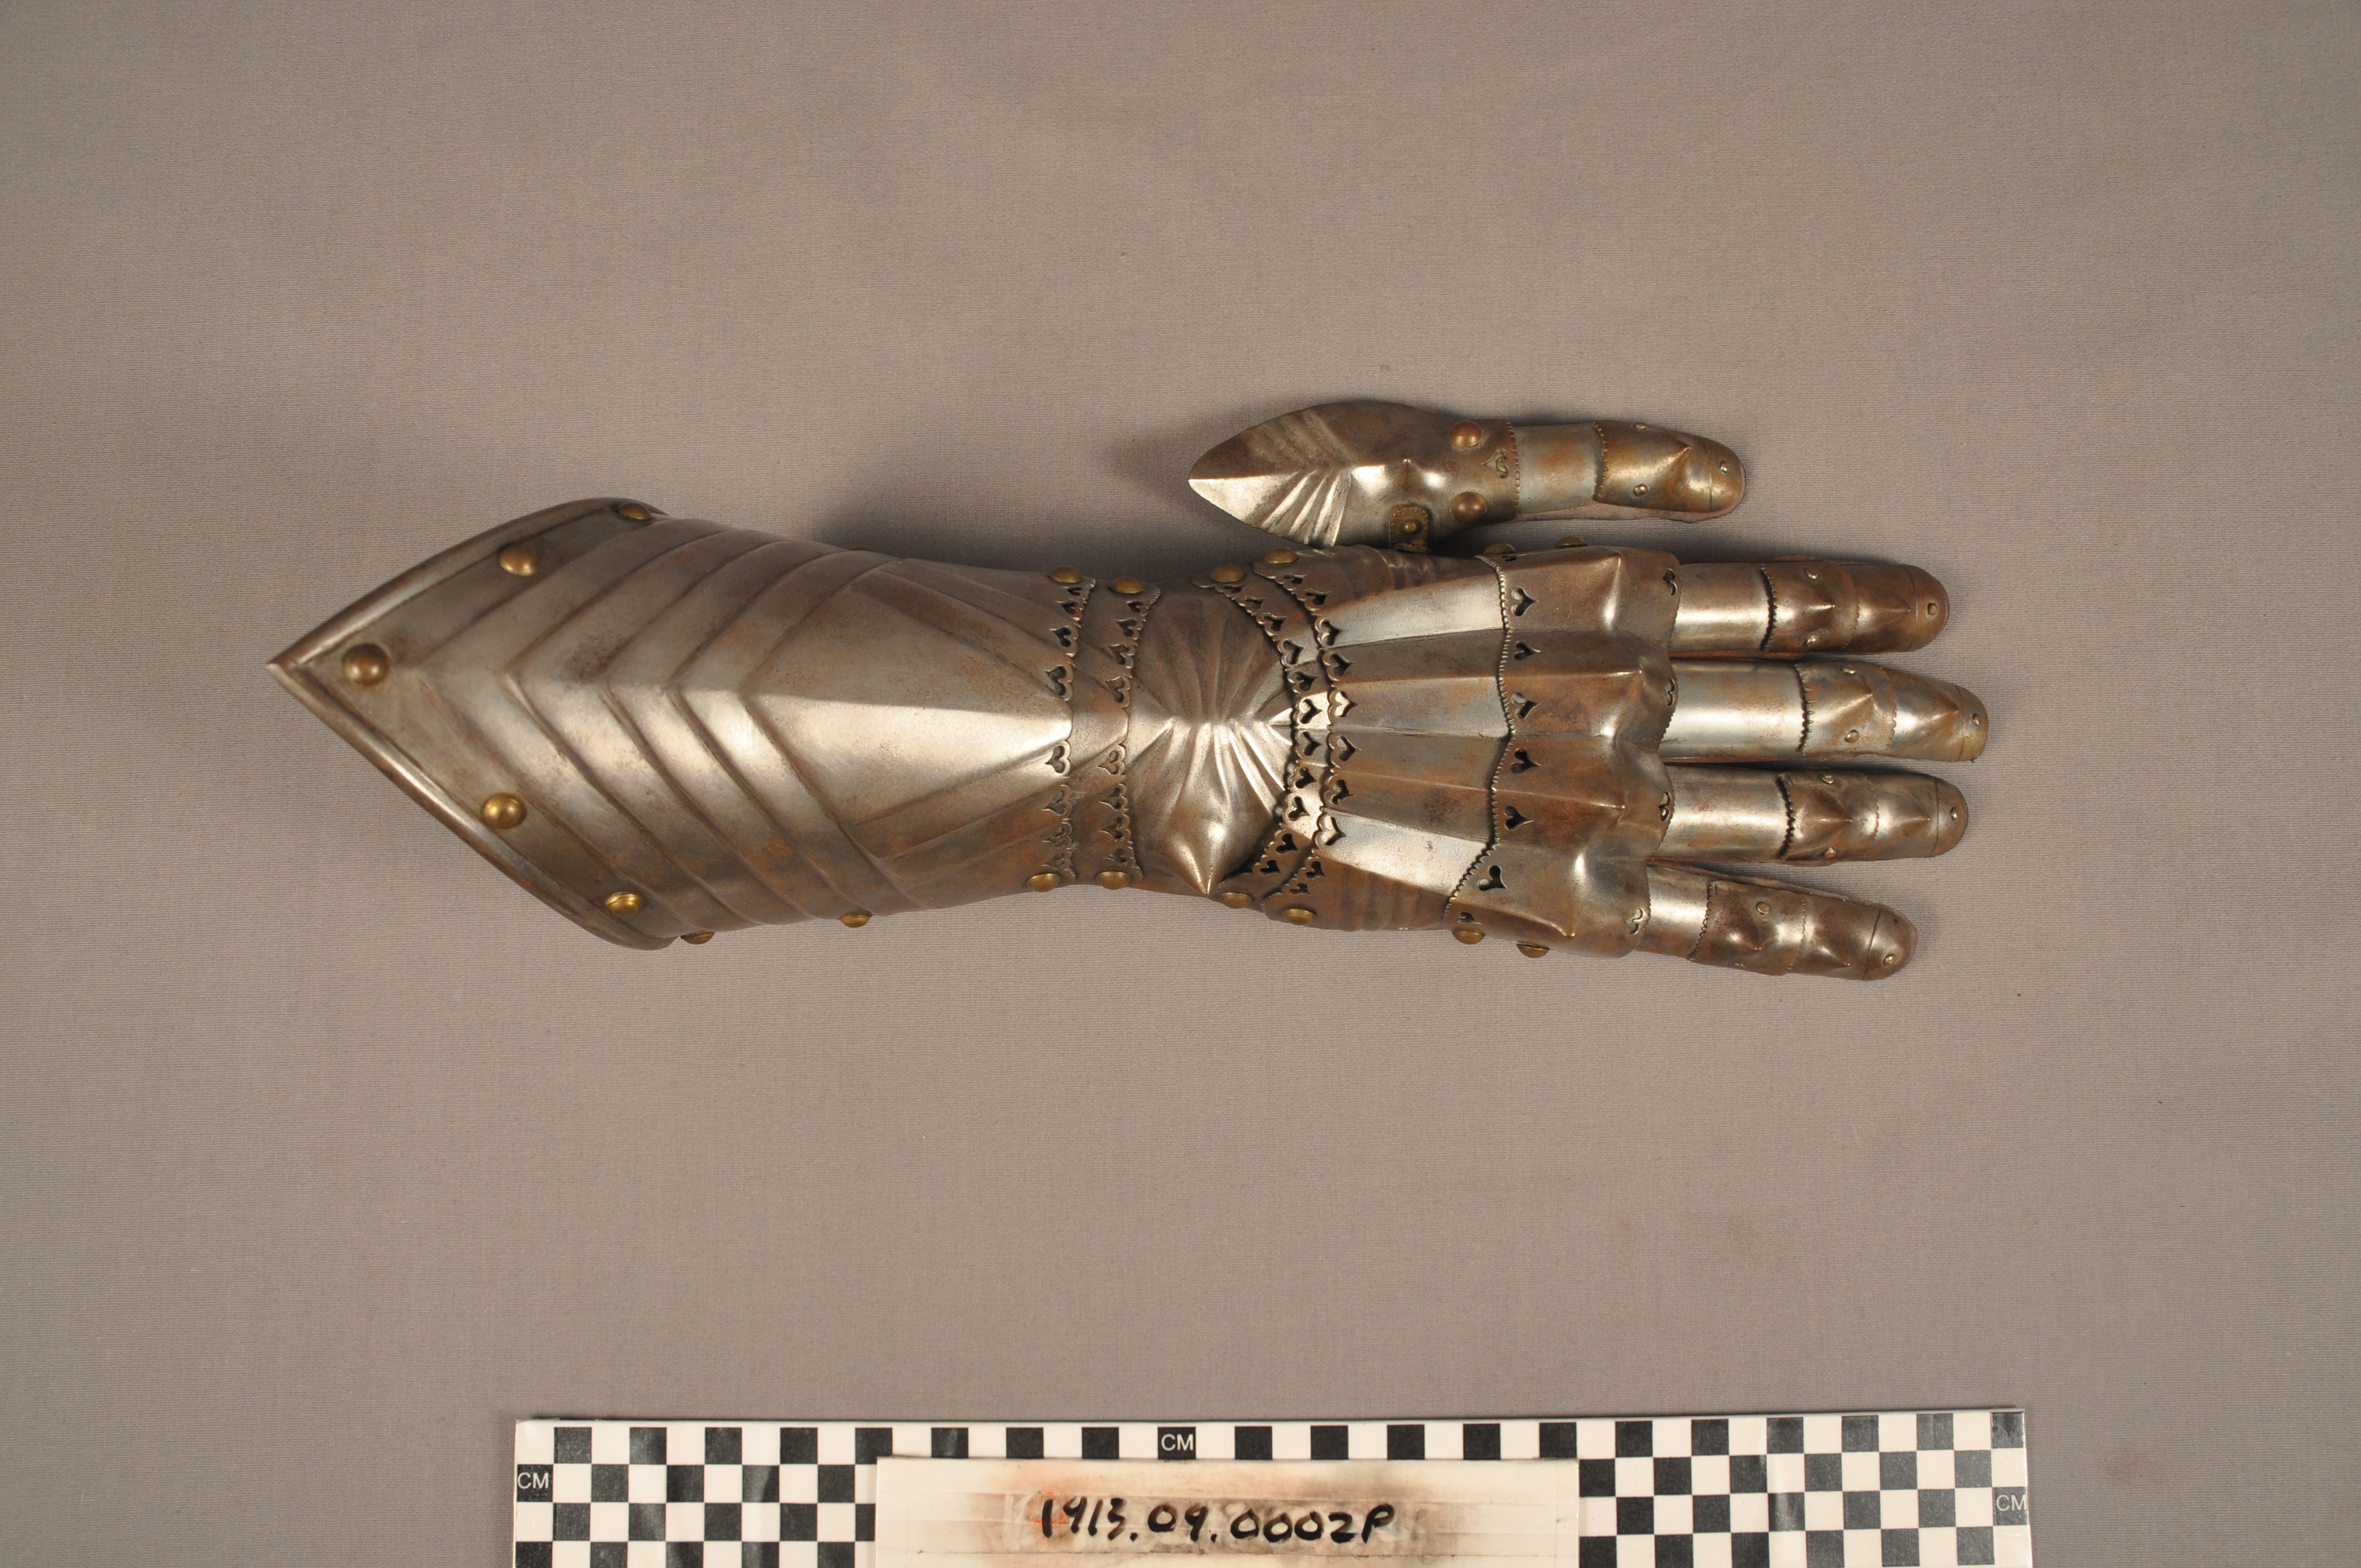 Reproduction Gothic Armor: Gauntlet, Search the Collection